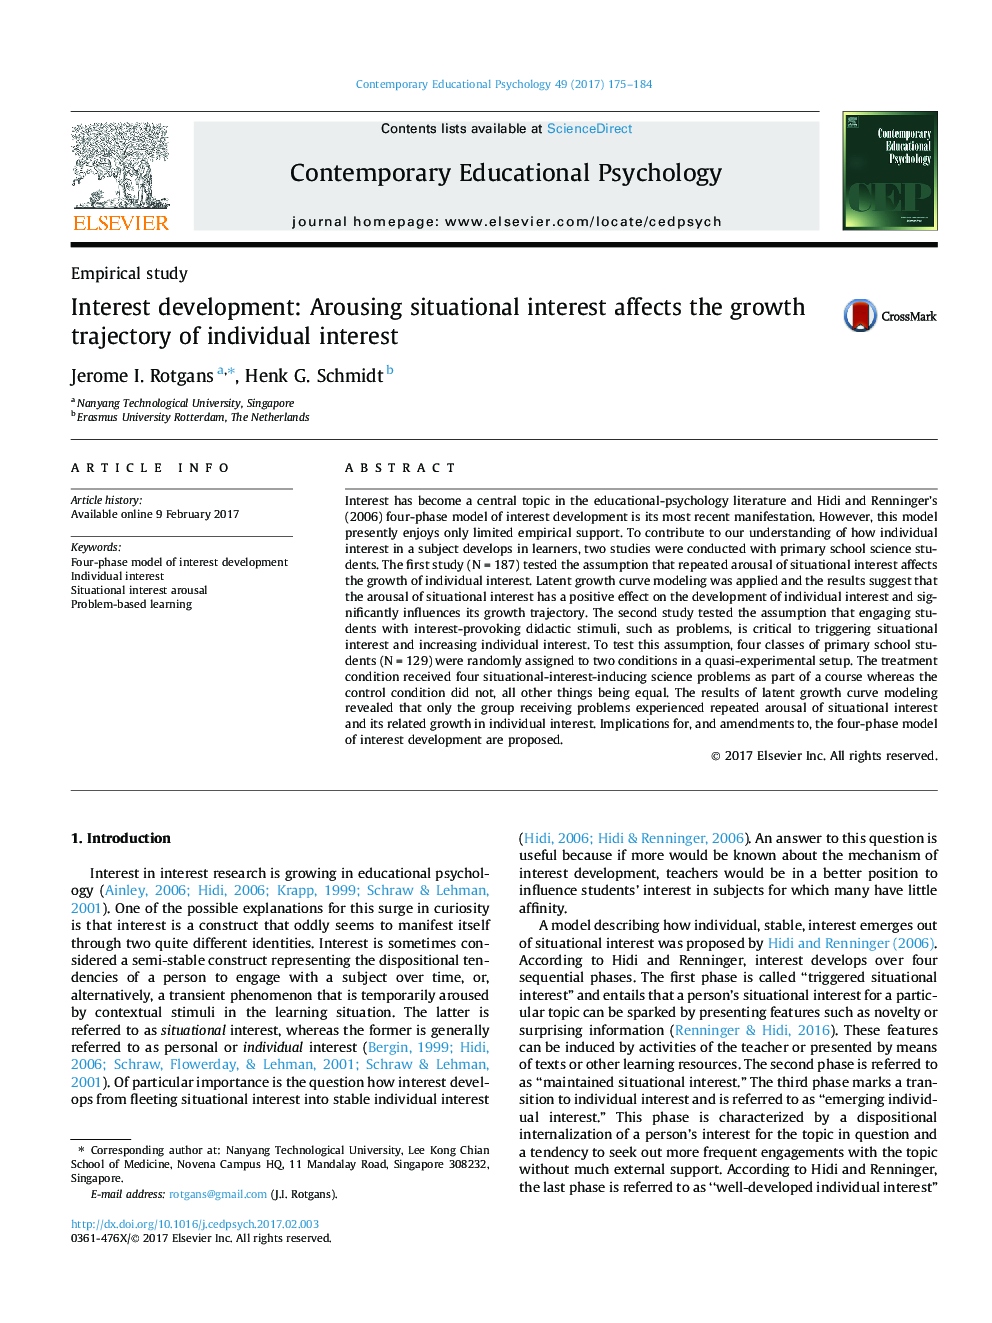 Interest development: Arousing situational interest affects the growth trajectory of individual interest